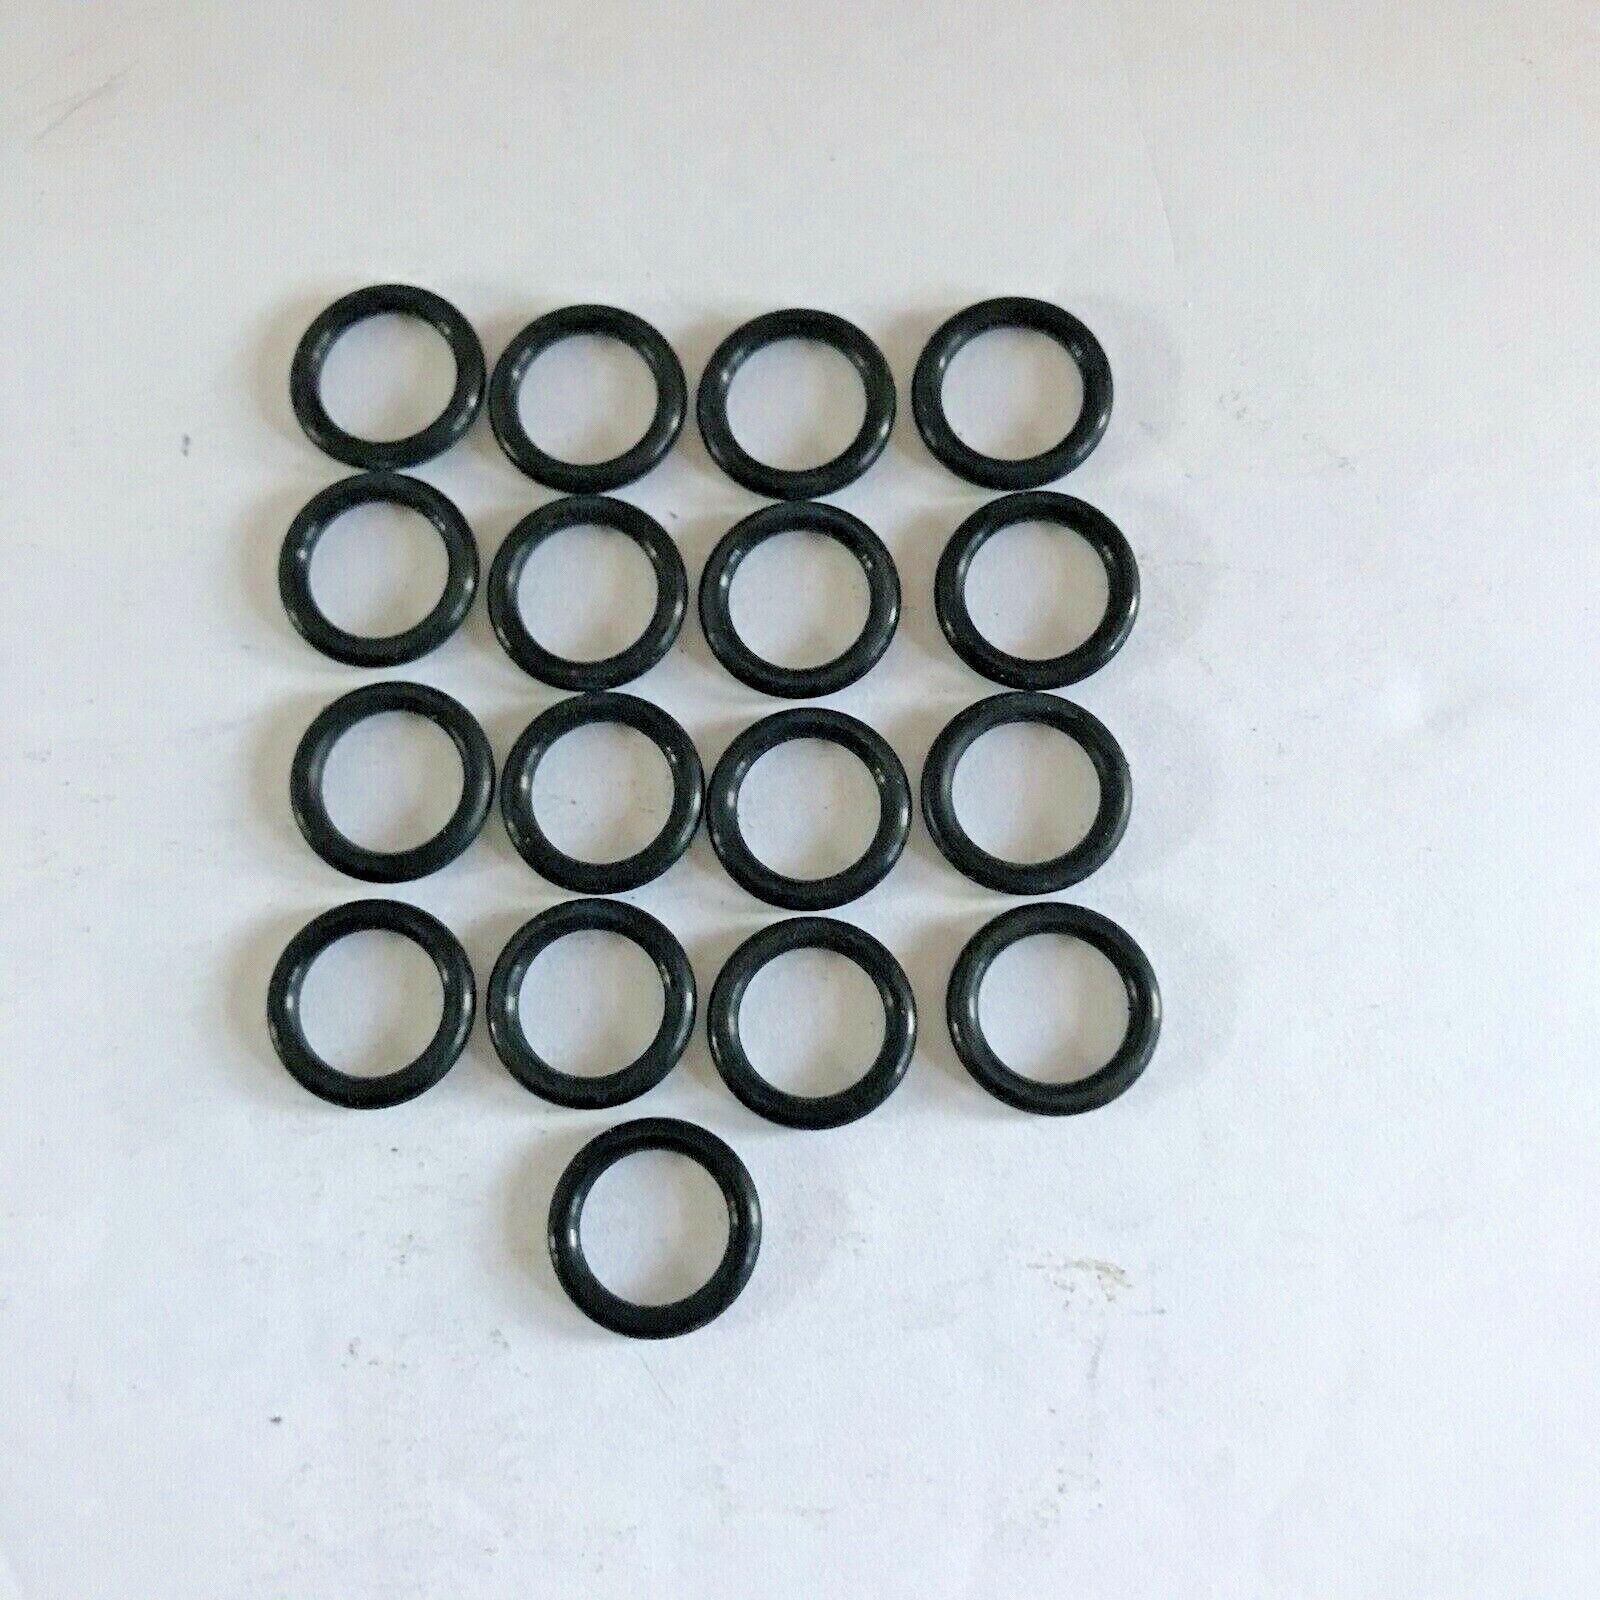 SEVENTEEN (17) BOSTITCH #MGR008819 O-RINGS FOR MANY FINISH NAILERS  - SHIPS FREE Bostitch MRG008819